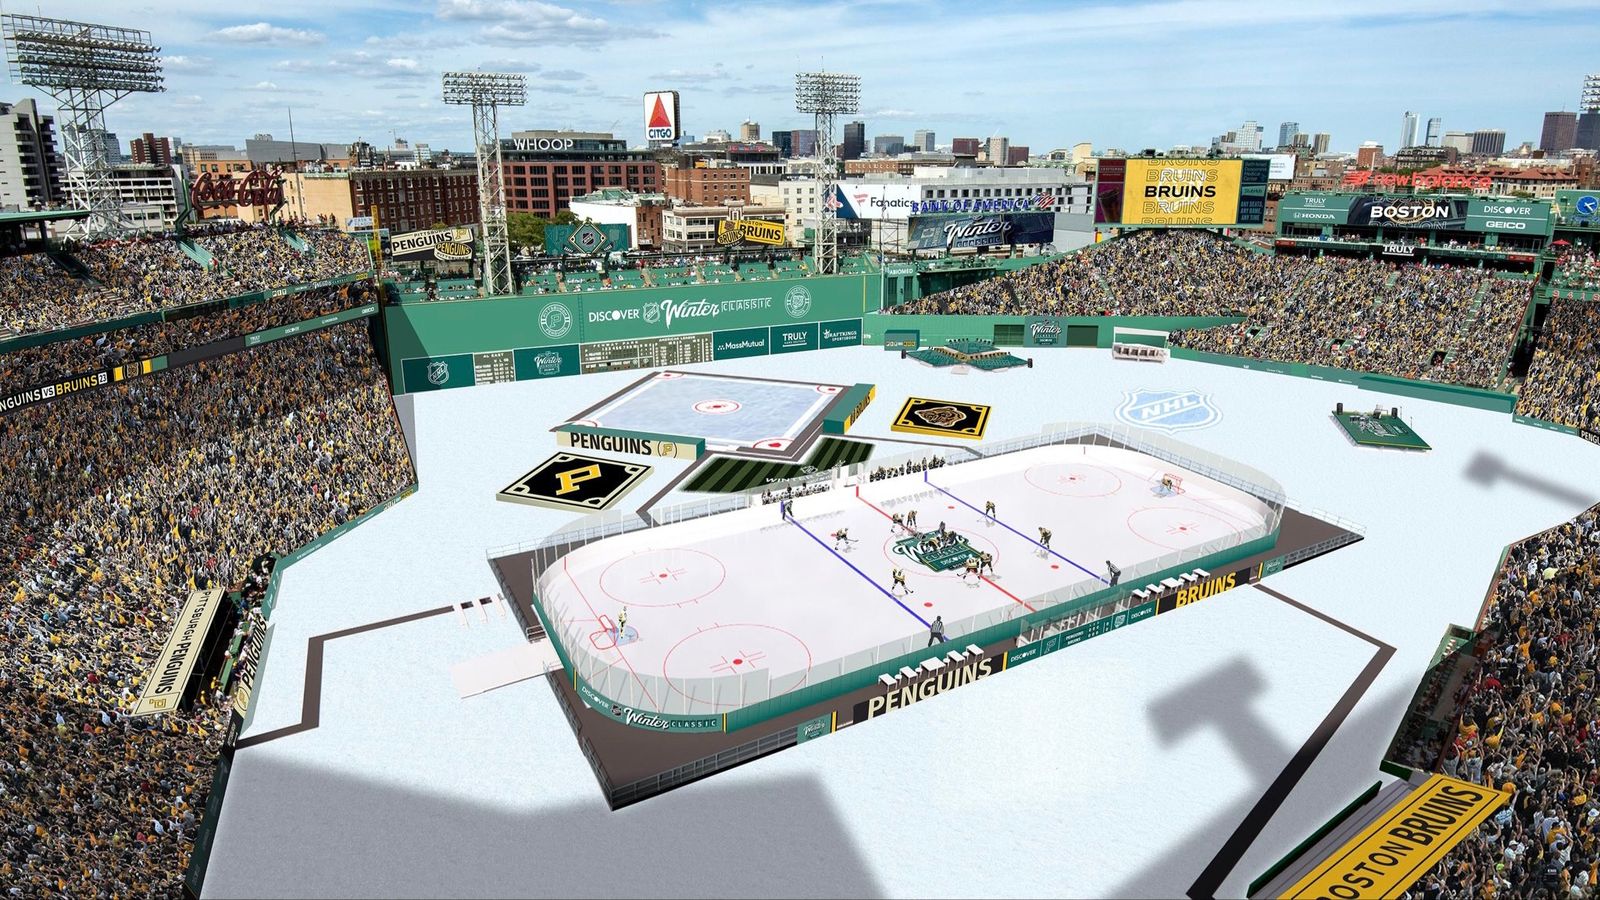 Mild weather projected for PenguinsBruins Winter Classic at Fenway